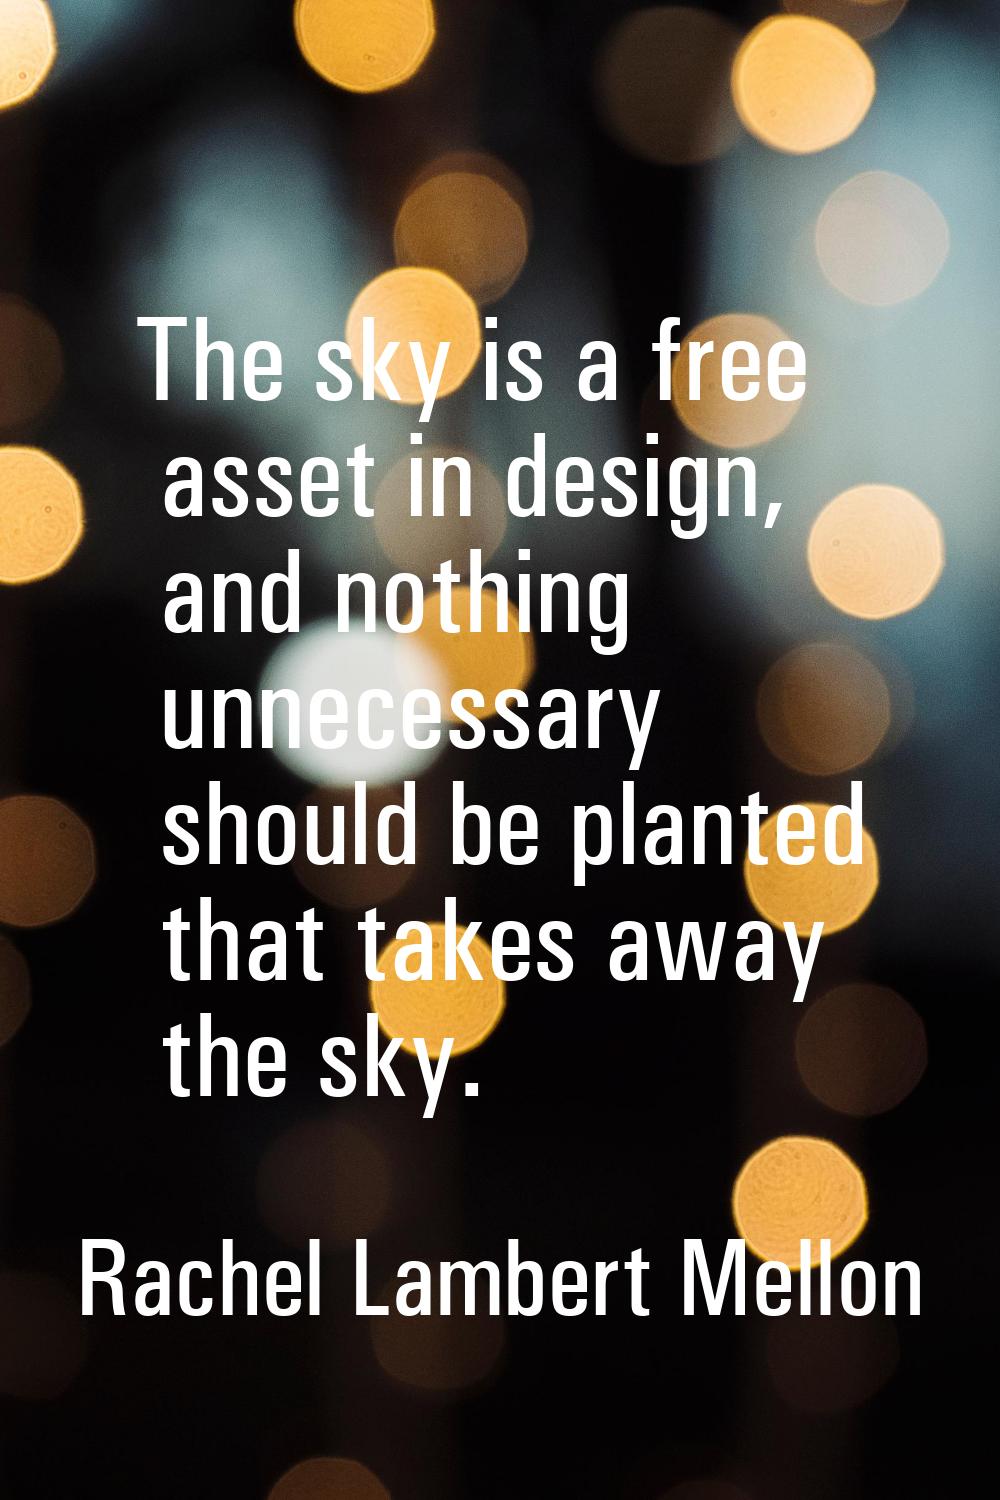 The sky is a free asset in design, and nothing unnecessary should be planted that takes away the sk